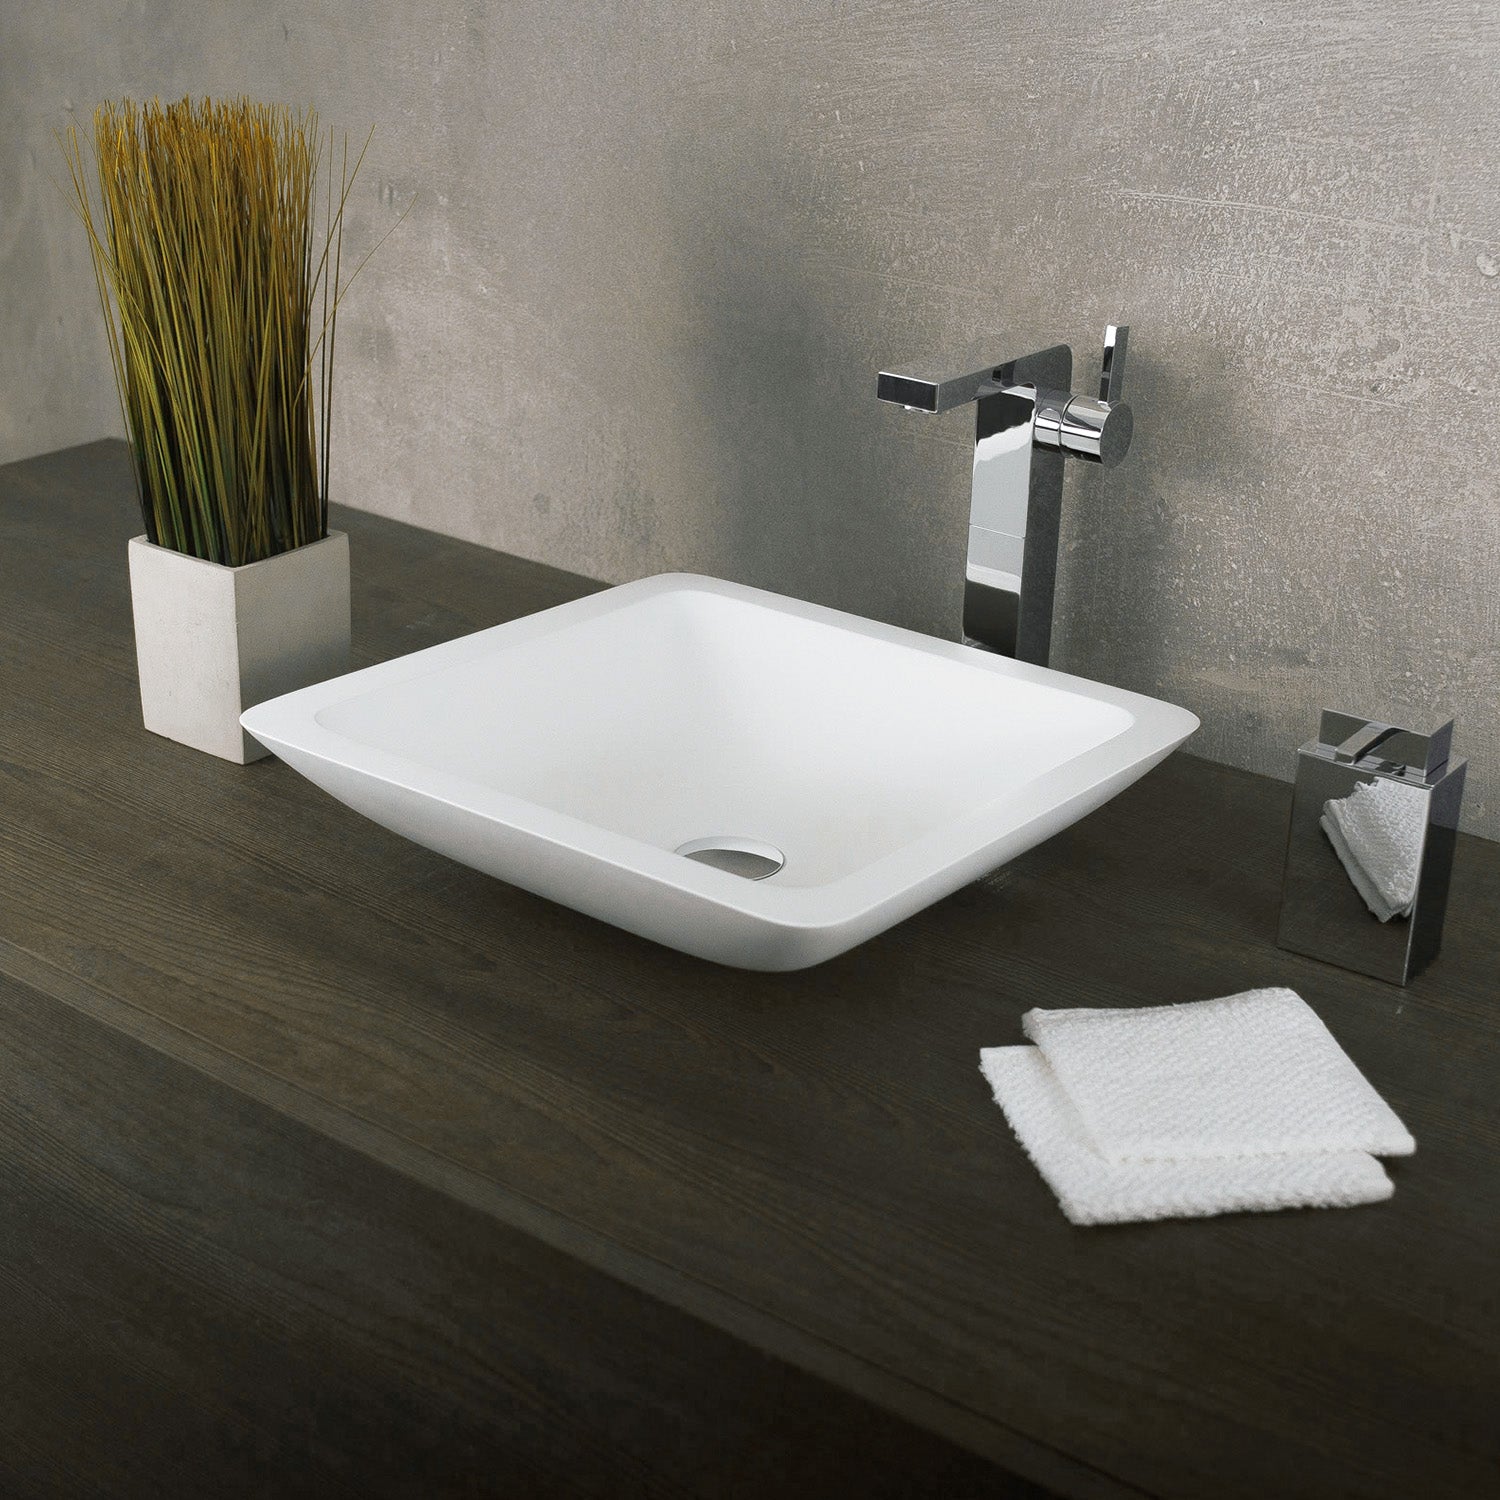 DAX Solid Surface Square Single Bowl Bathroom Vessel Sink, White Matte Finish, 16-1/2 x 16-1/2 x 4 Inches (DAX-AB-1320)